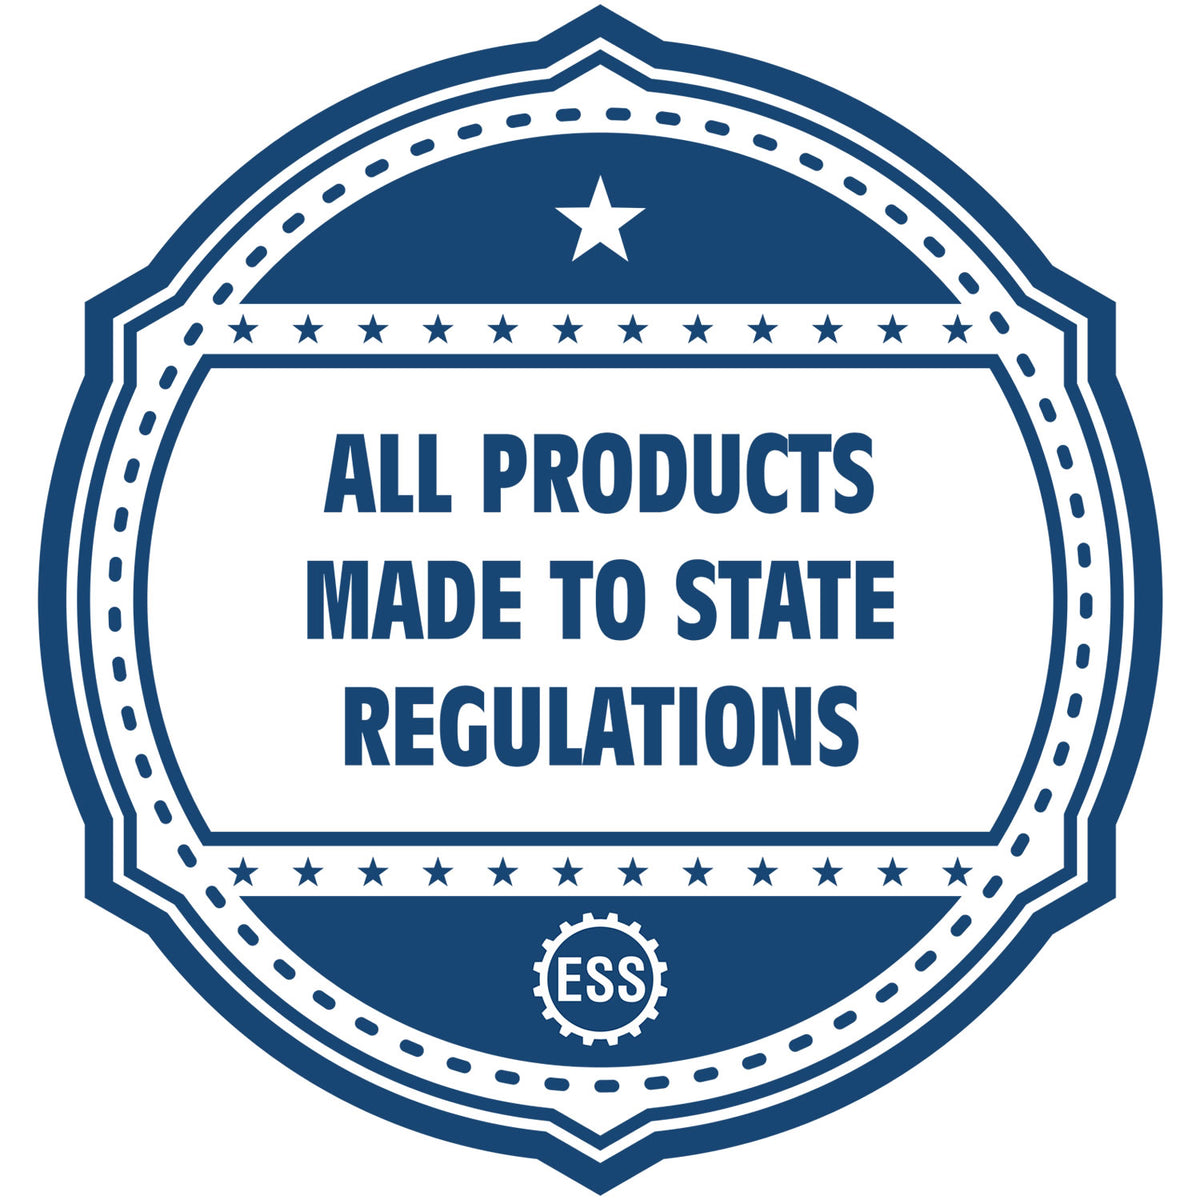 An icon or badge element for the Premium MaxLight Pre-Inked Washington Landscape Architectural Stamp showing that this product is made in compliance with state regulations.